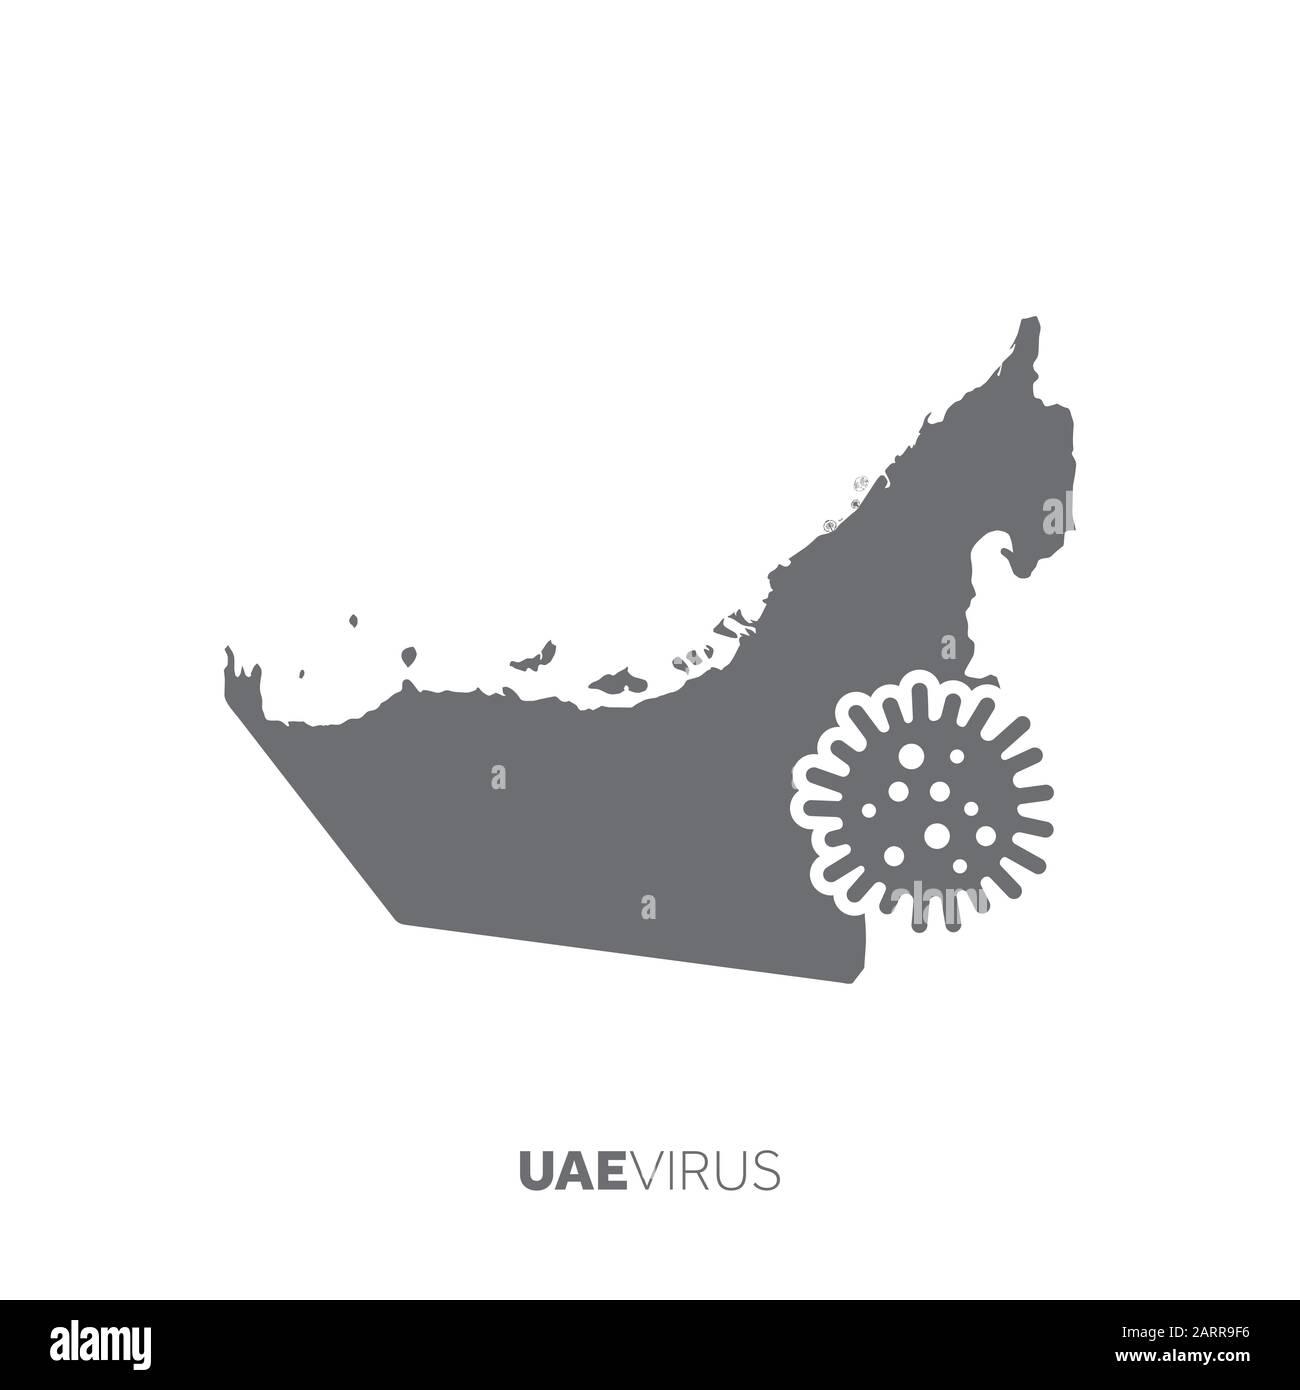 UAE map with a virus microbe. Illness and disease outbreak Stock Vector